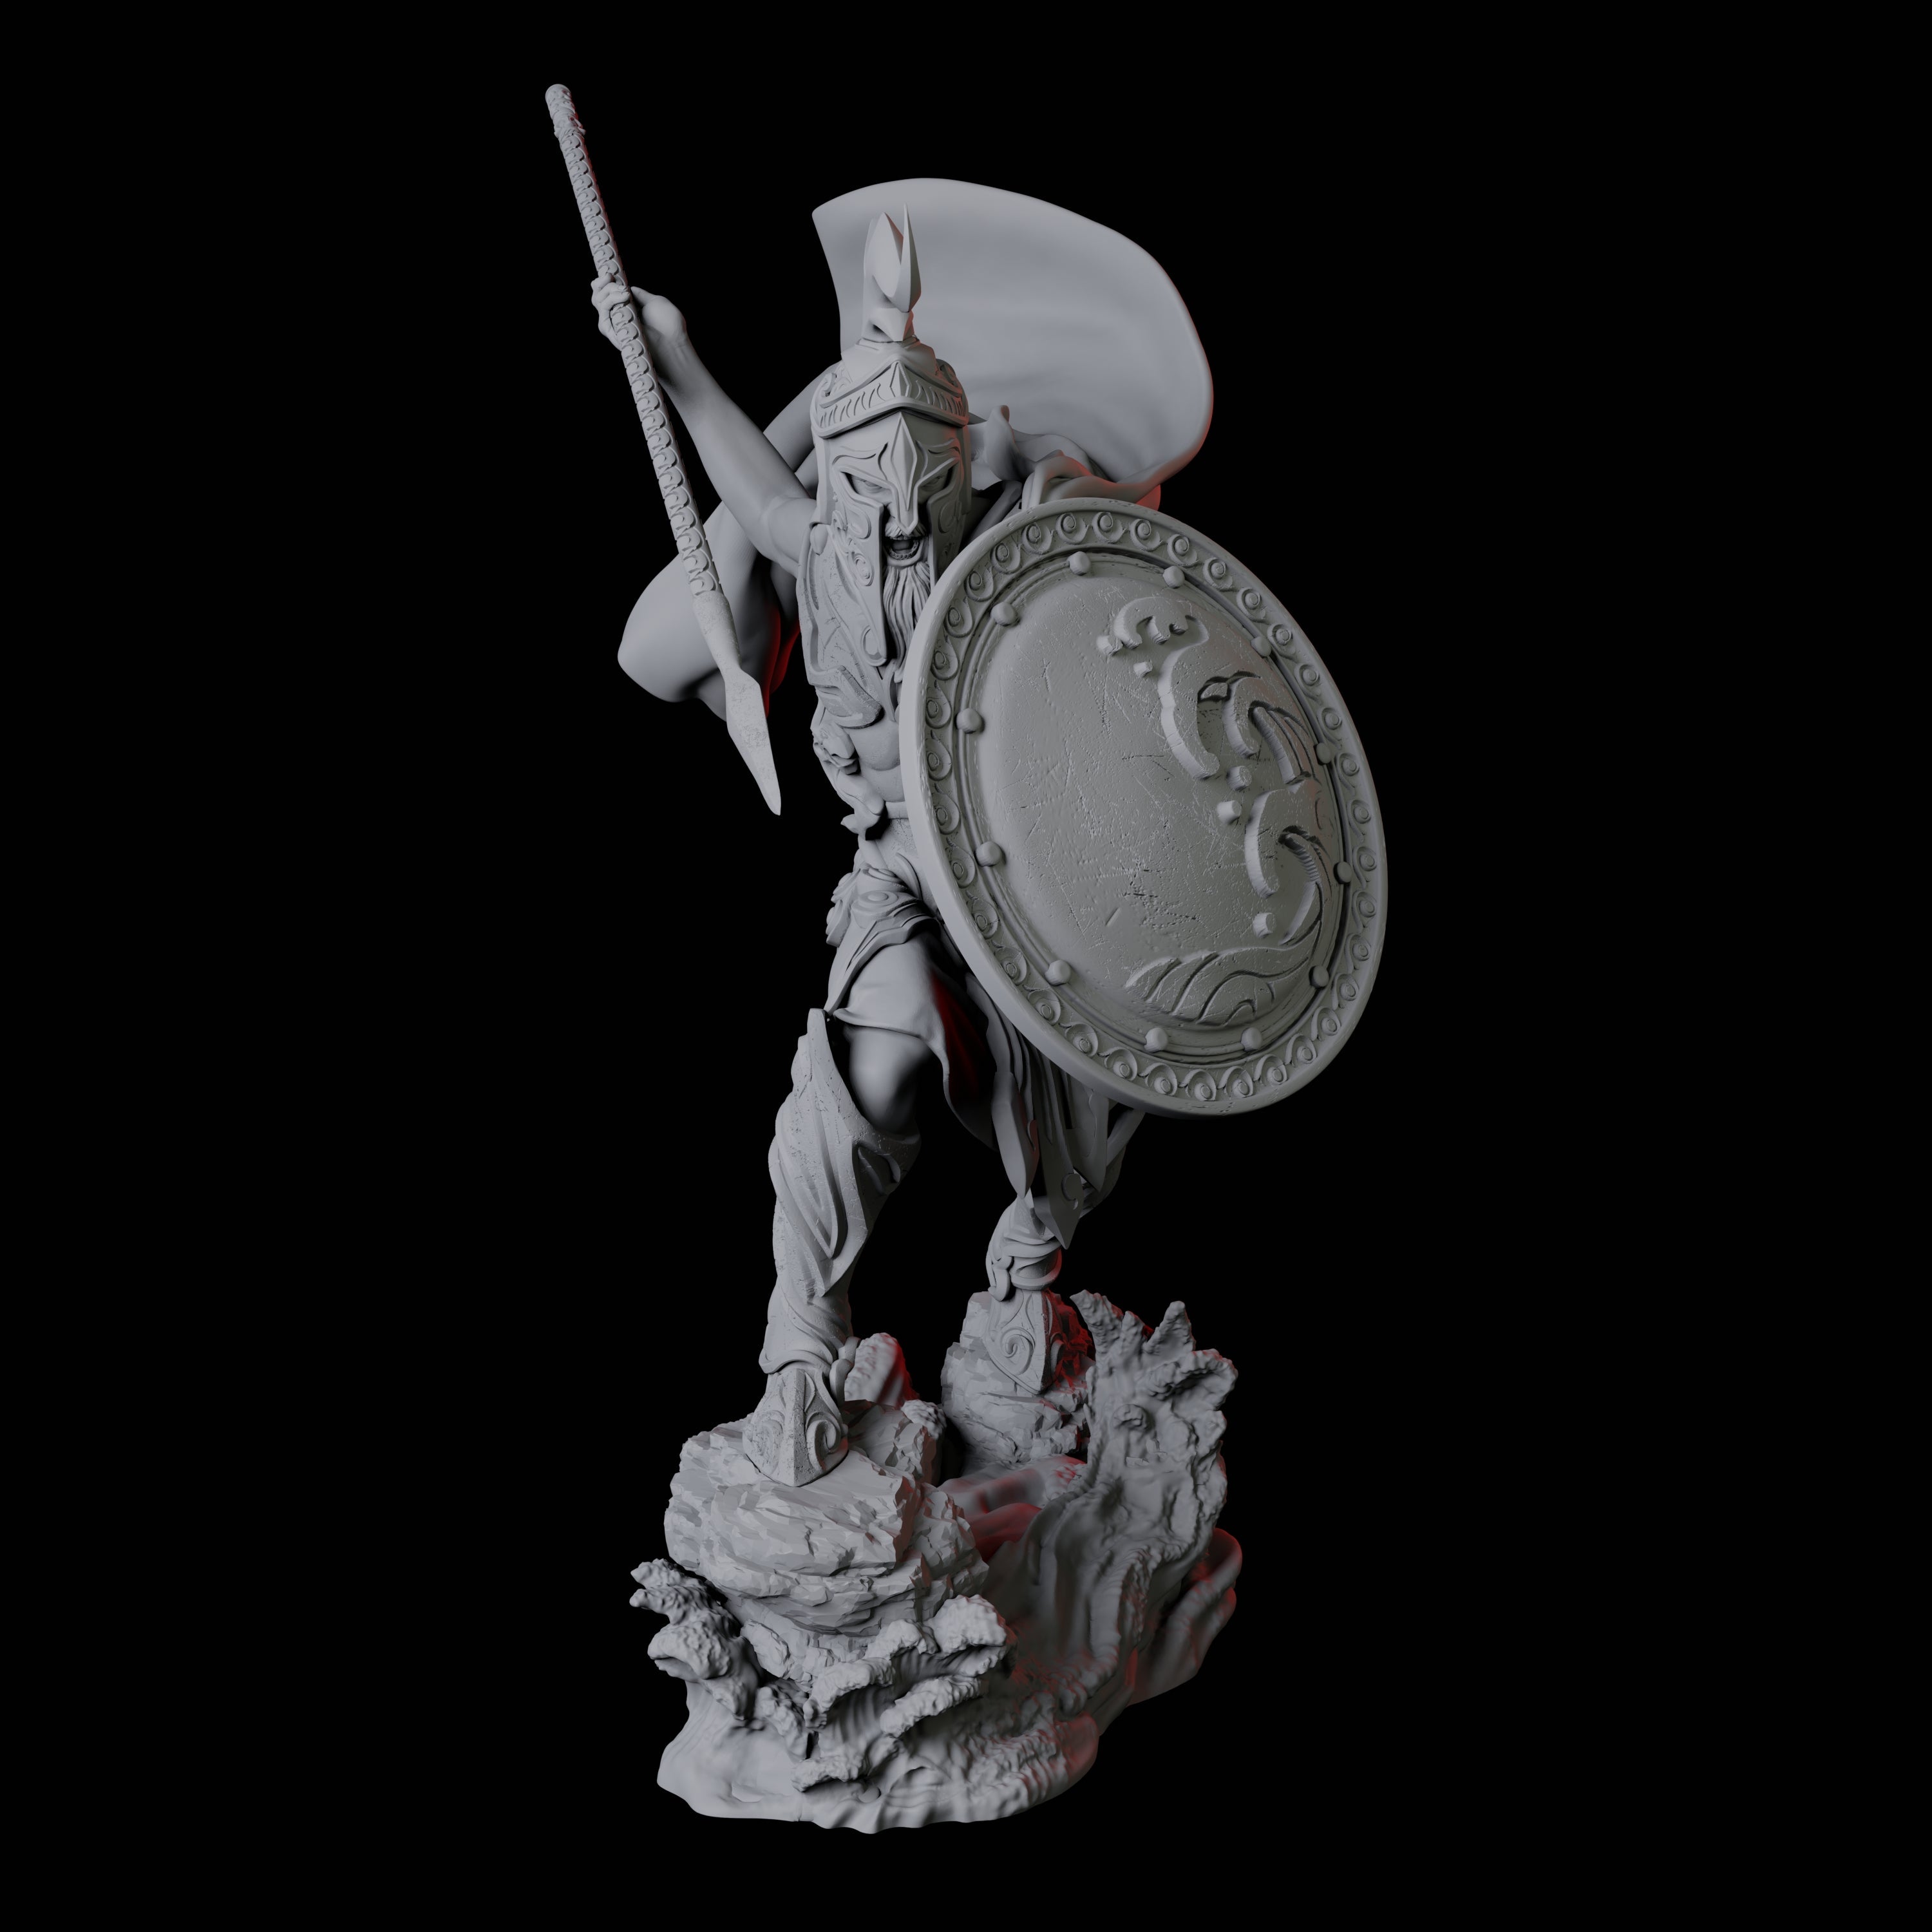 Giant Hoplite A Miniature for Dungeons and Dragons, Pathfinder or other TTRPGs